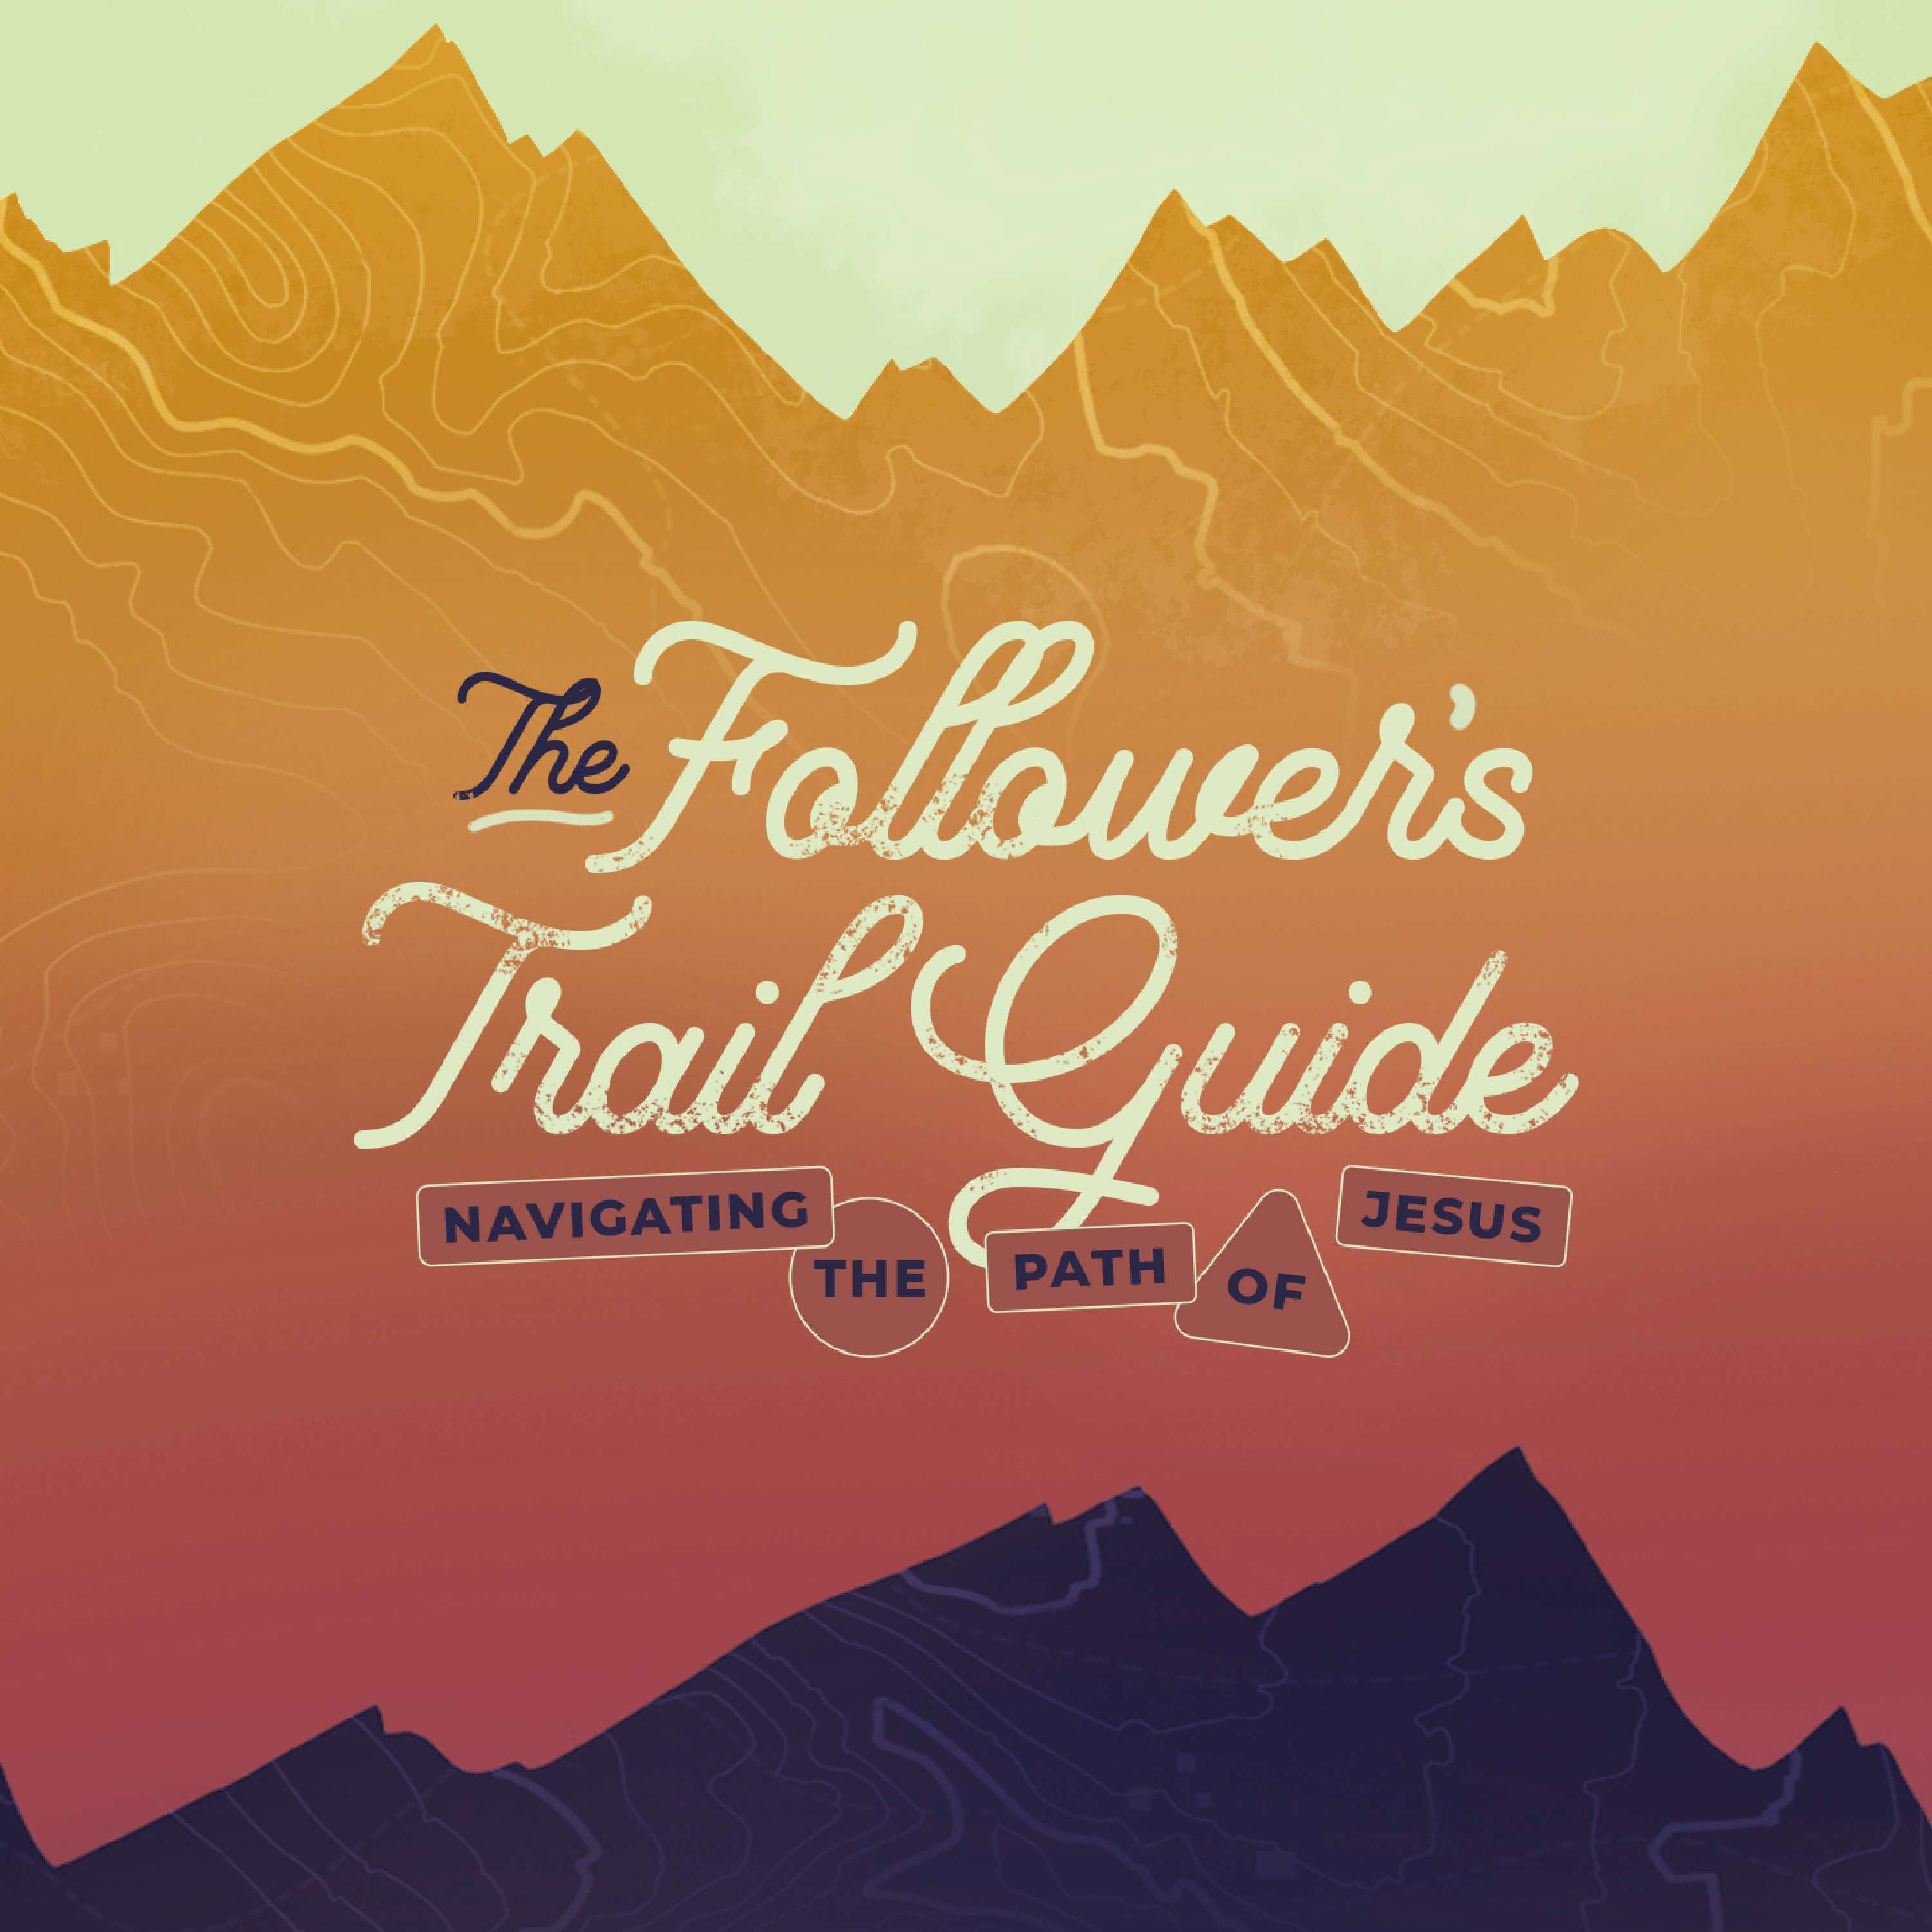 The Follower's Trail Guide - Pt 10: Walking in the Way - John 16:25 - 33